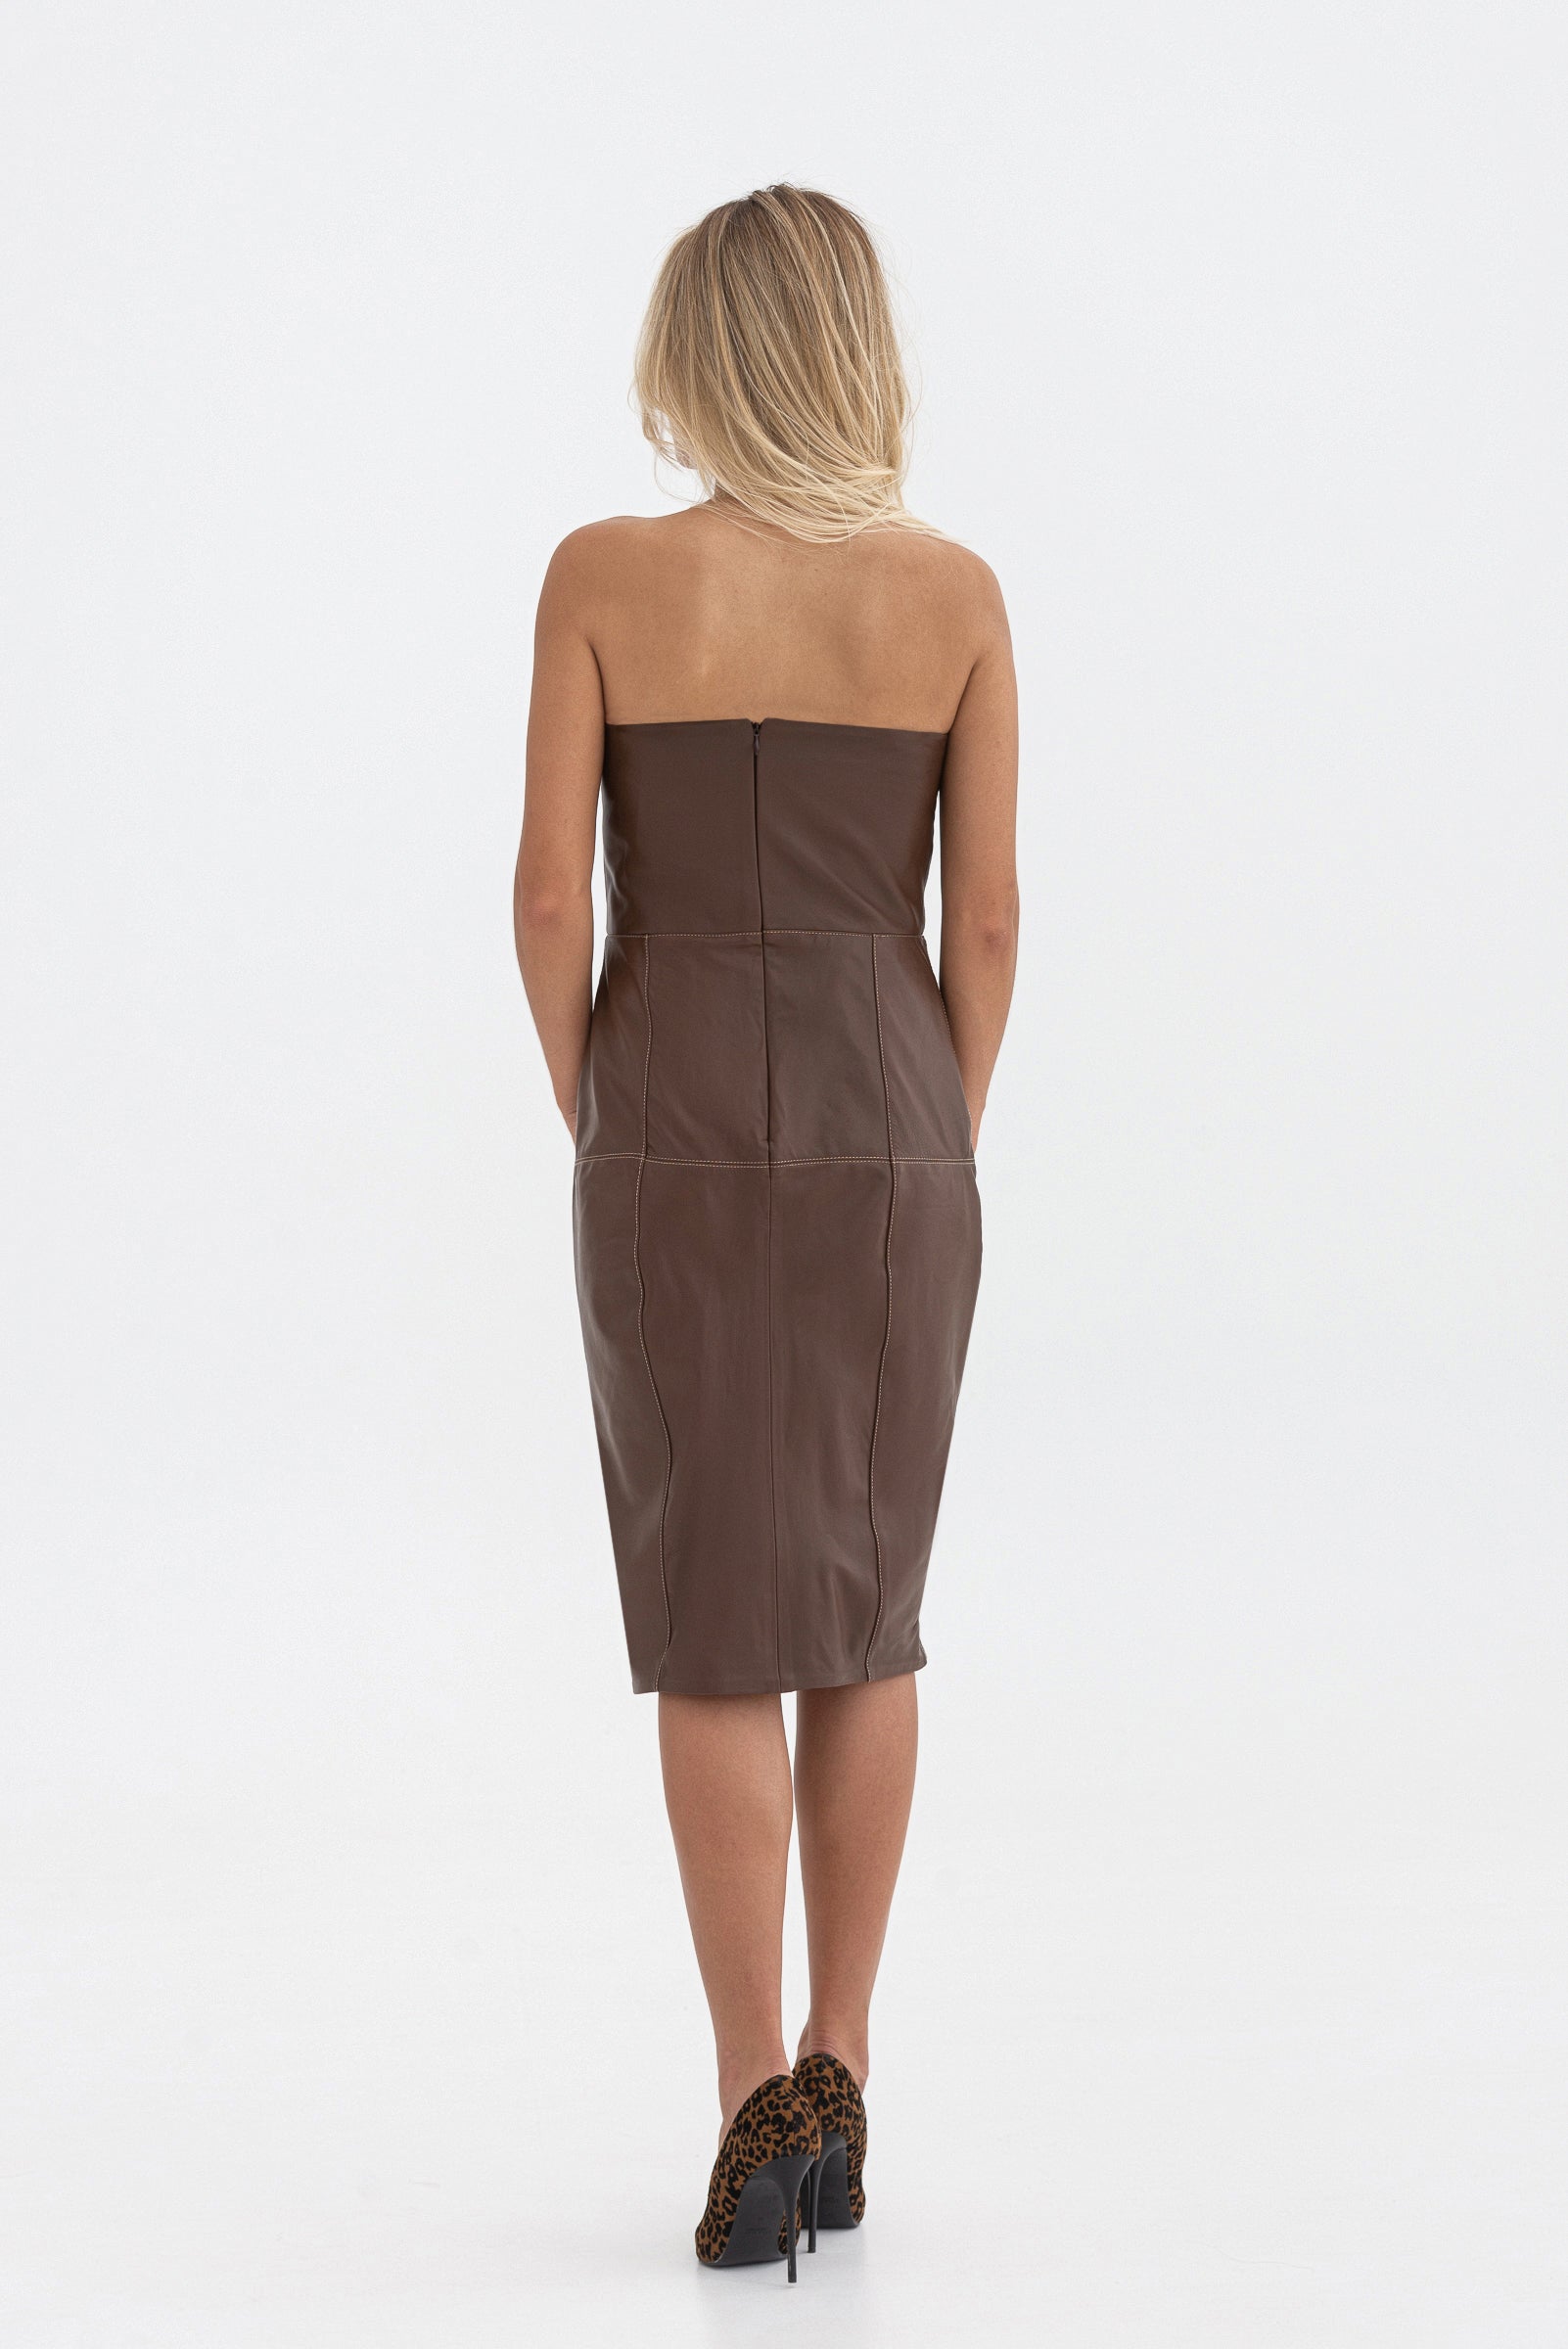 Strapless dress made of genuine leather. Adorned with decorative stitching.